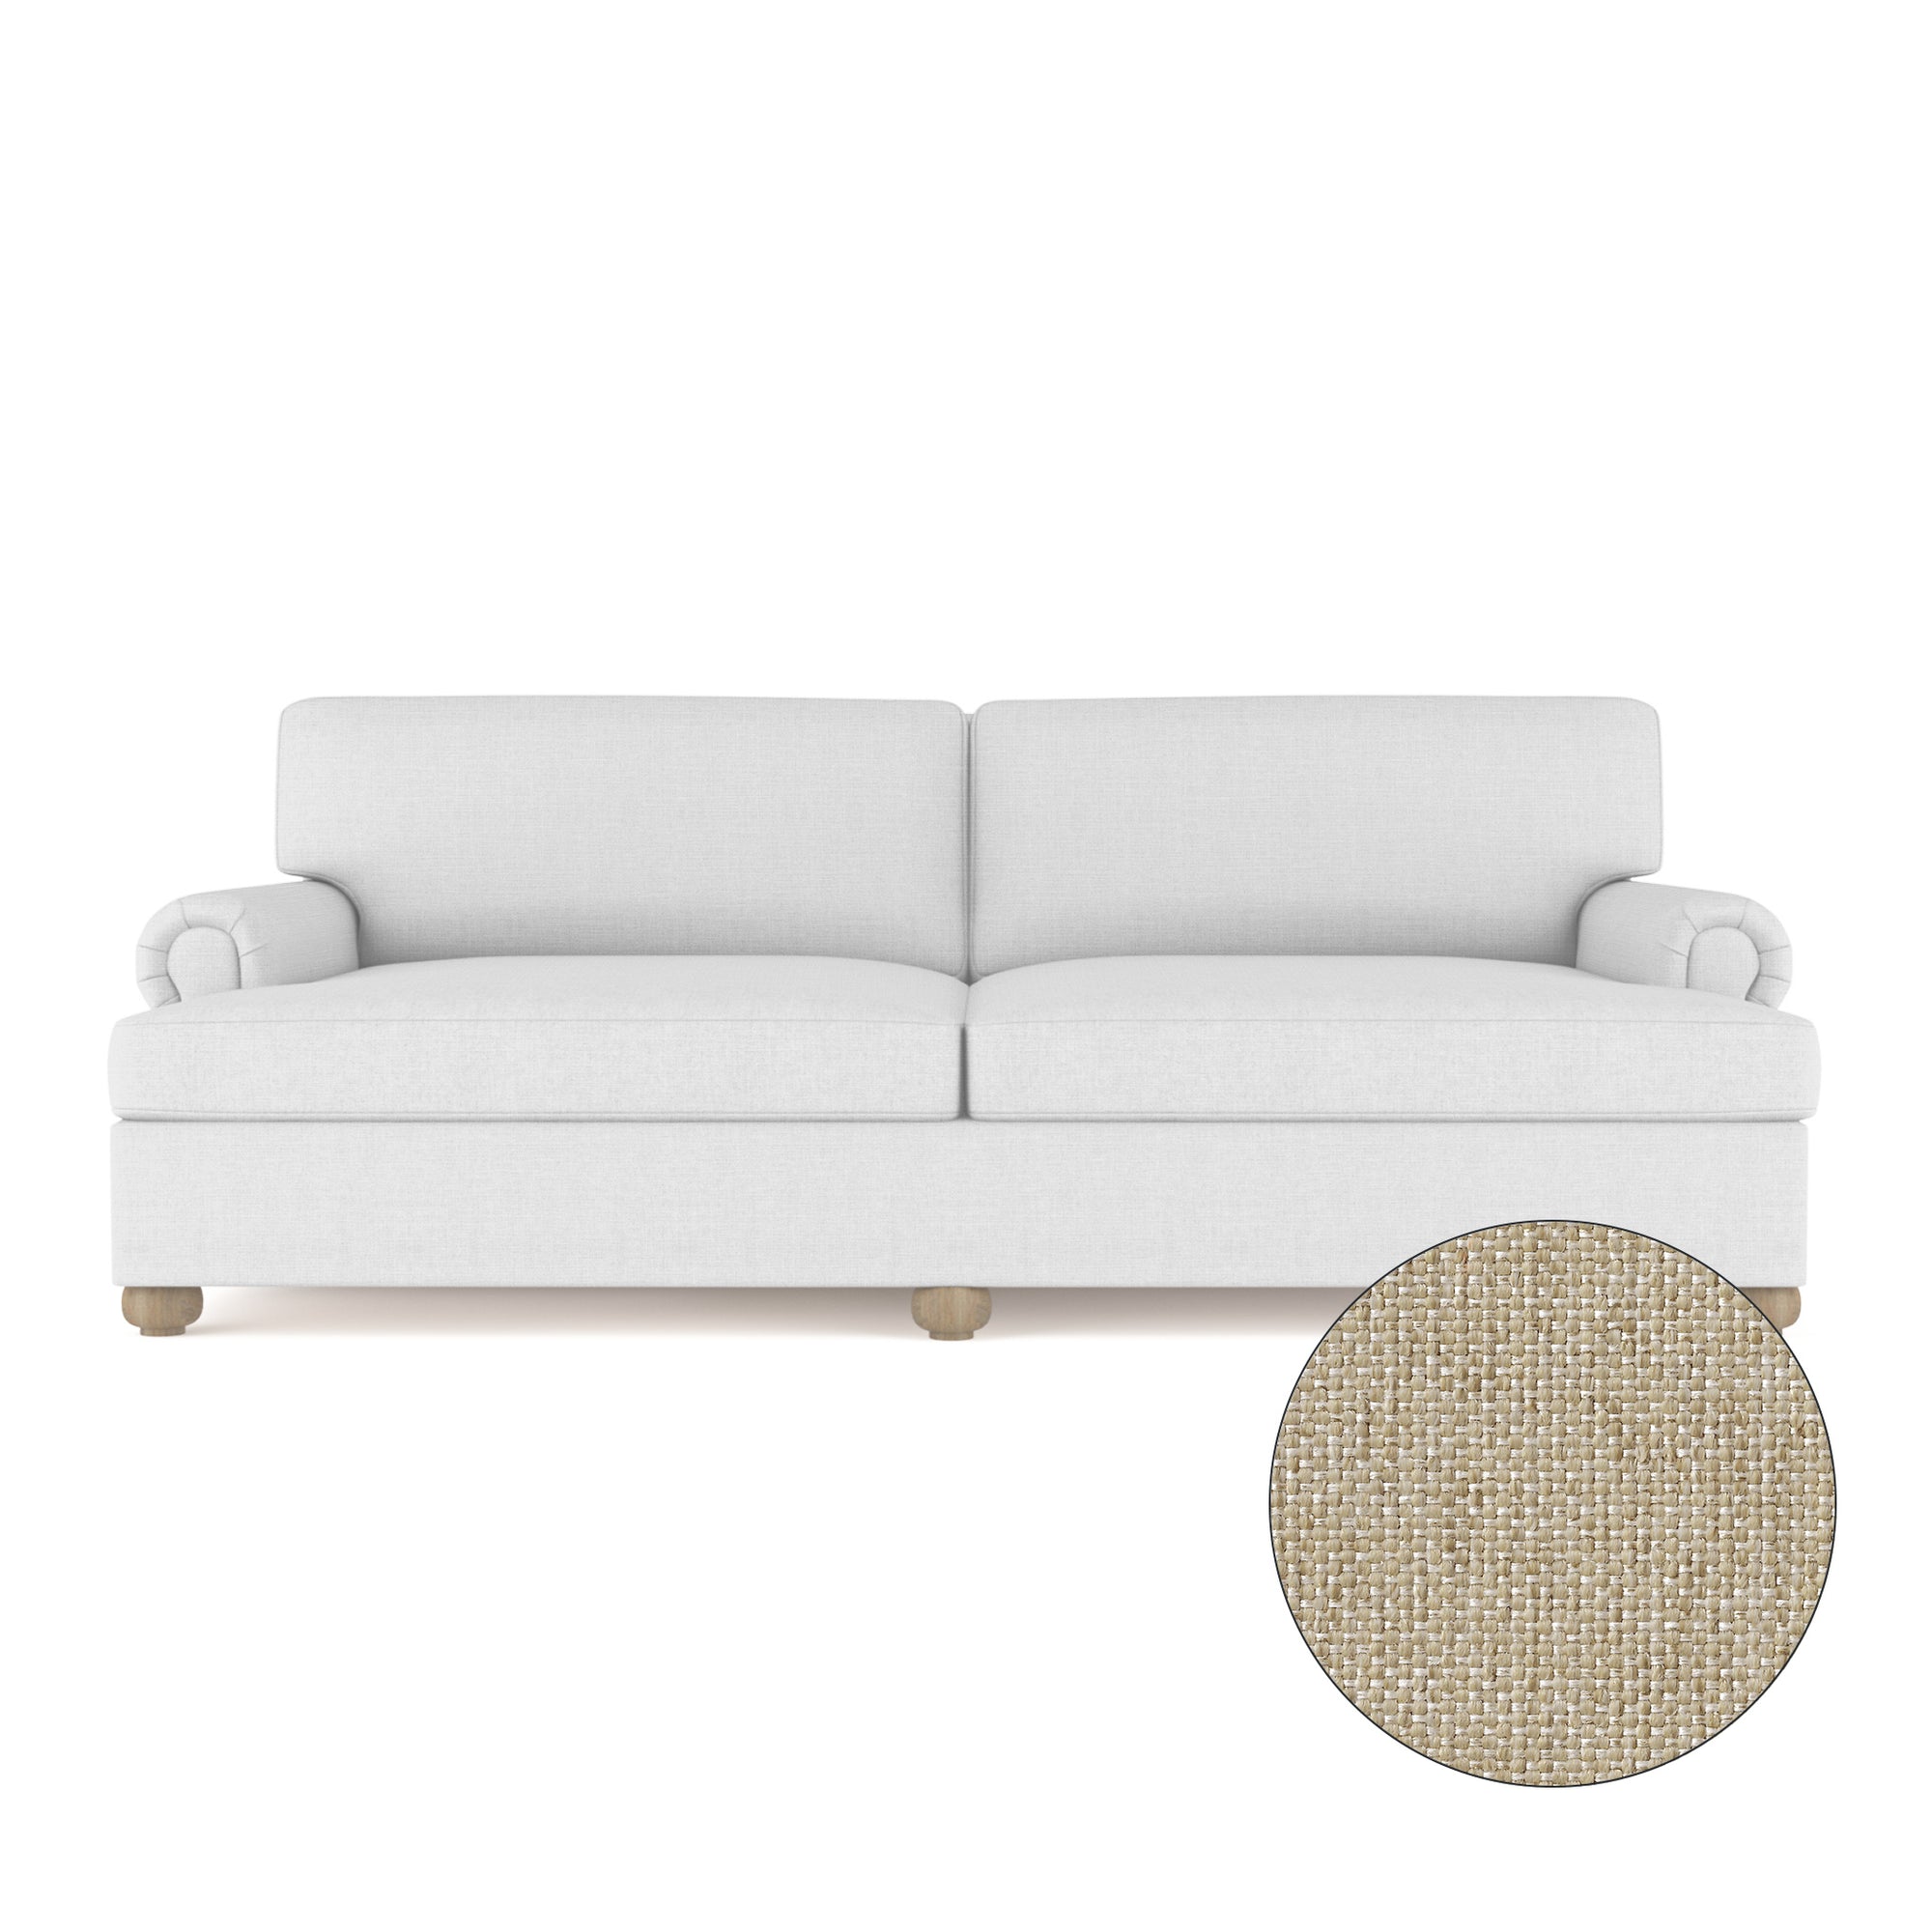 Leroy Daybed - Oyster Pebble Weave Linen